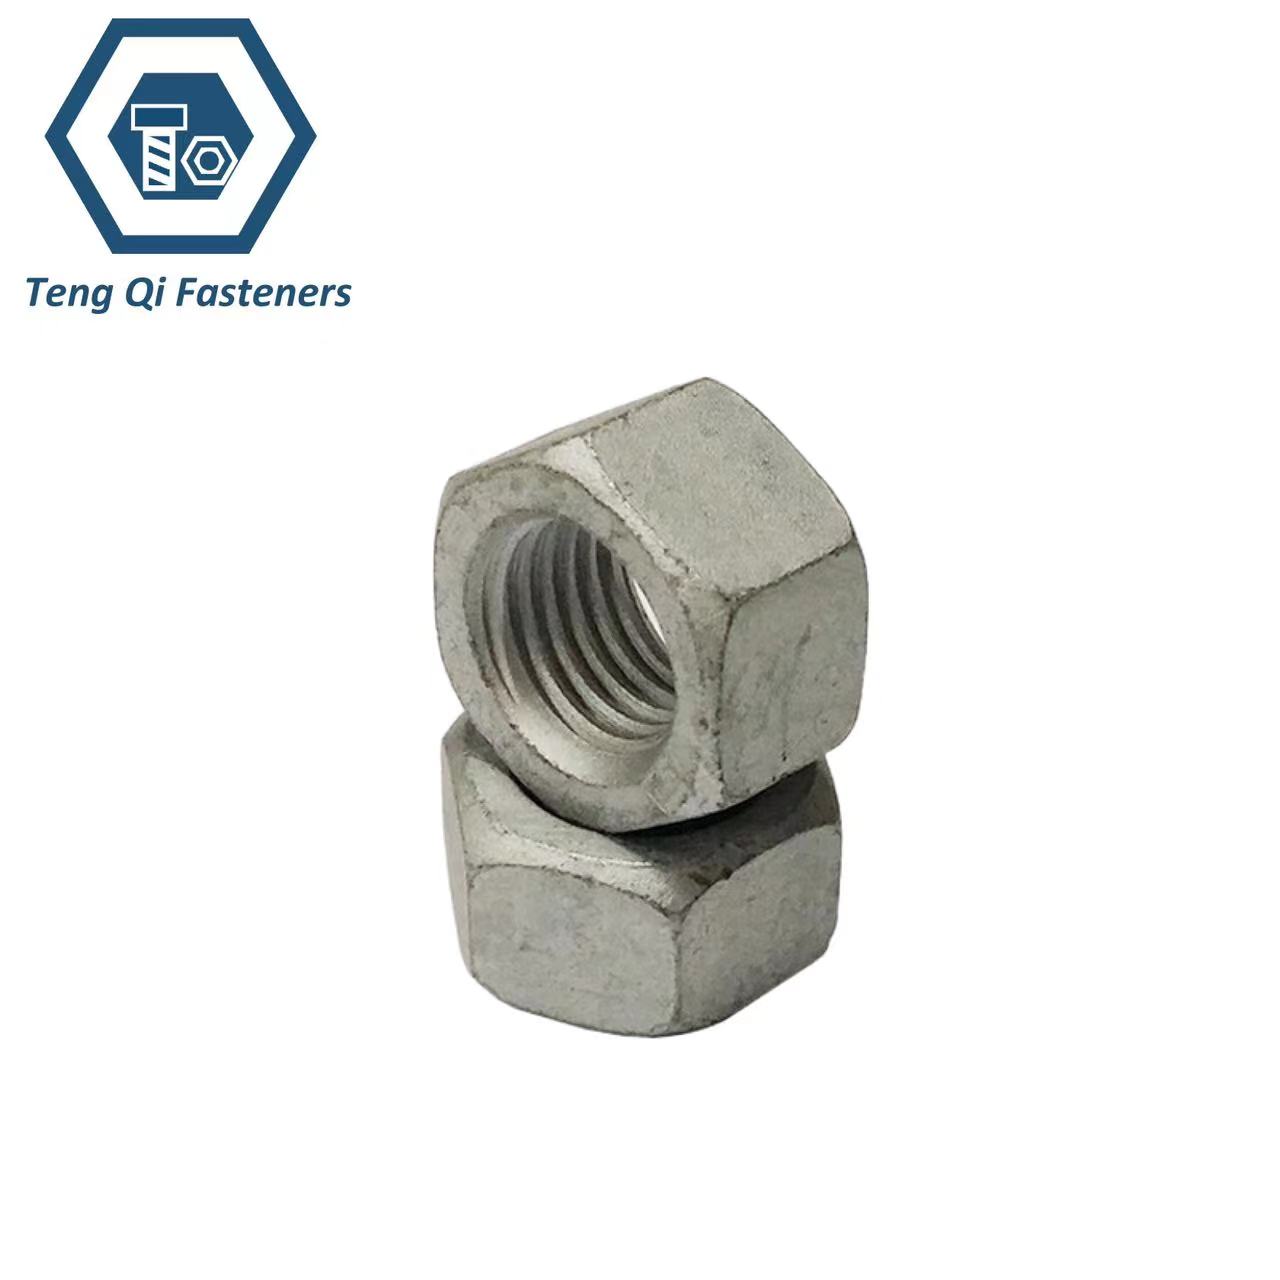 GOST 28919 Hot Dip Galvanized Russia Standard Flange Connections Thick Hex Nuts